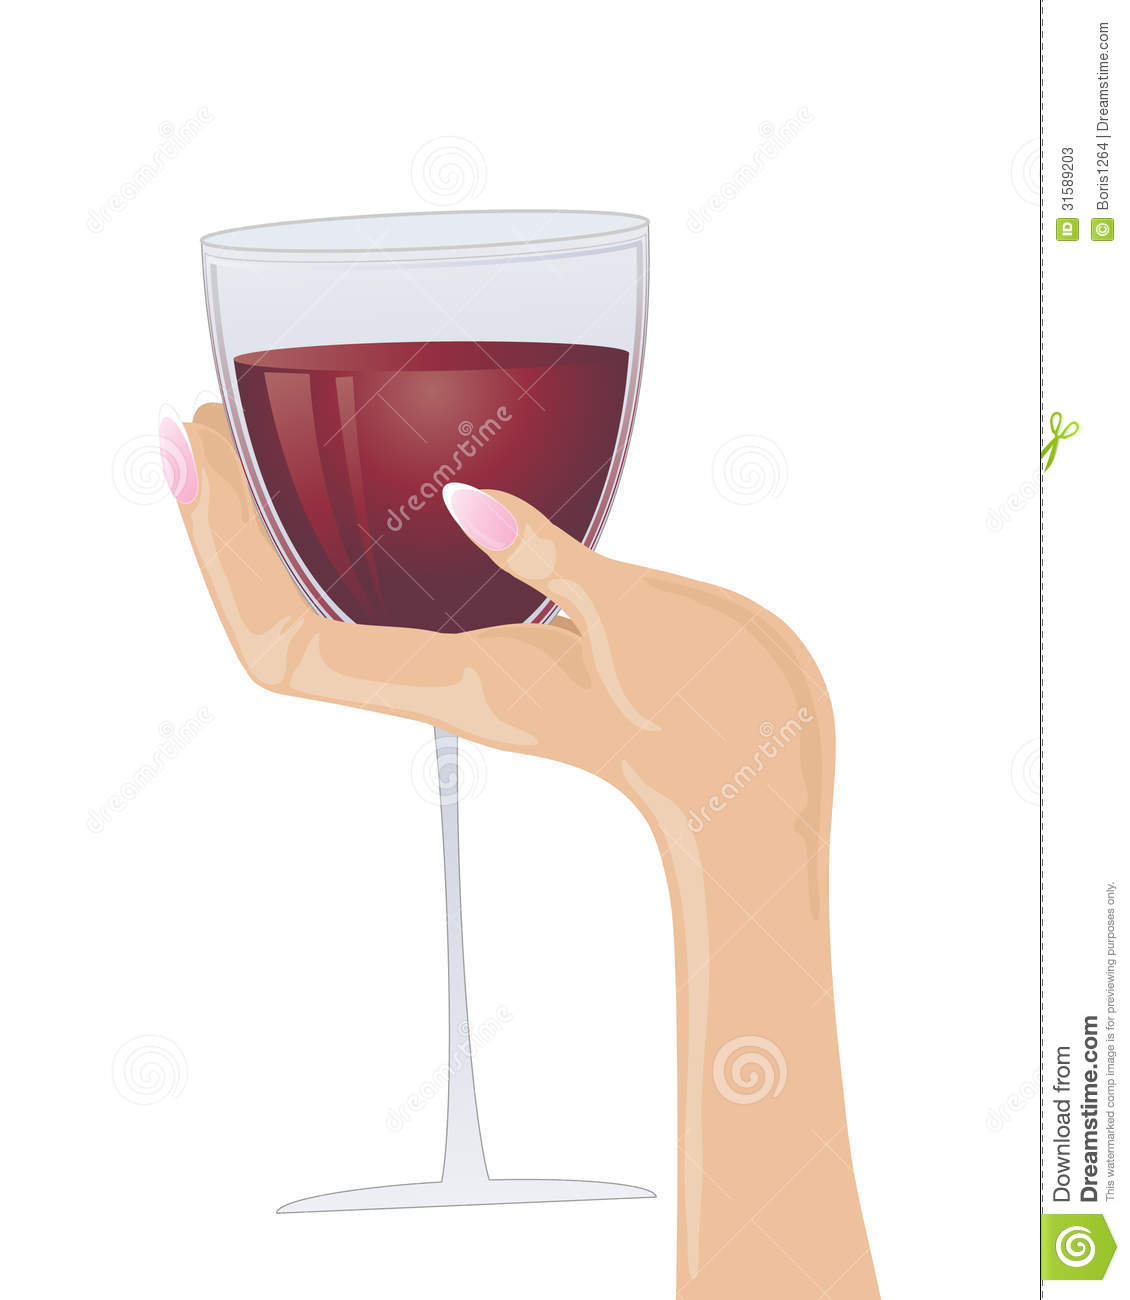 Holding A Half Full Glass Of Red Wine Isolated On A White Background